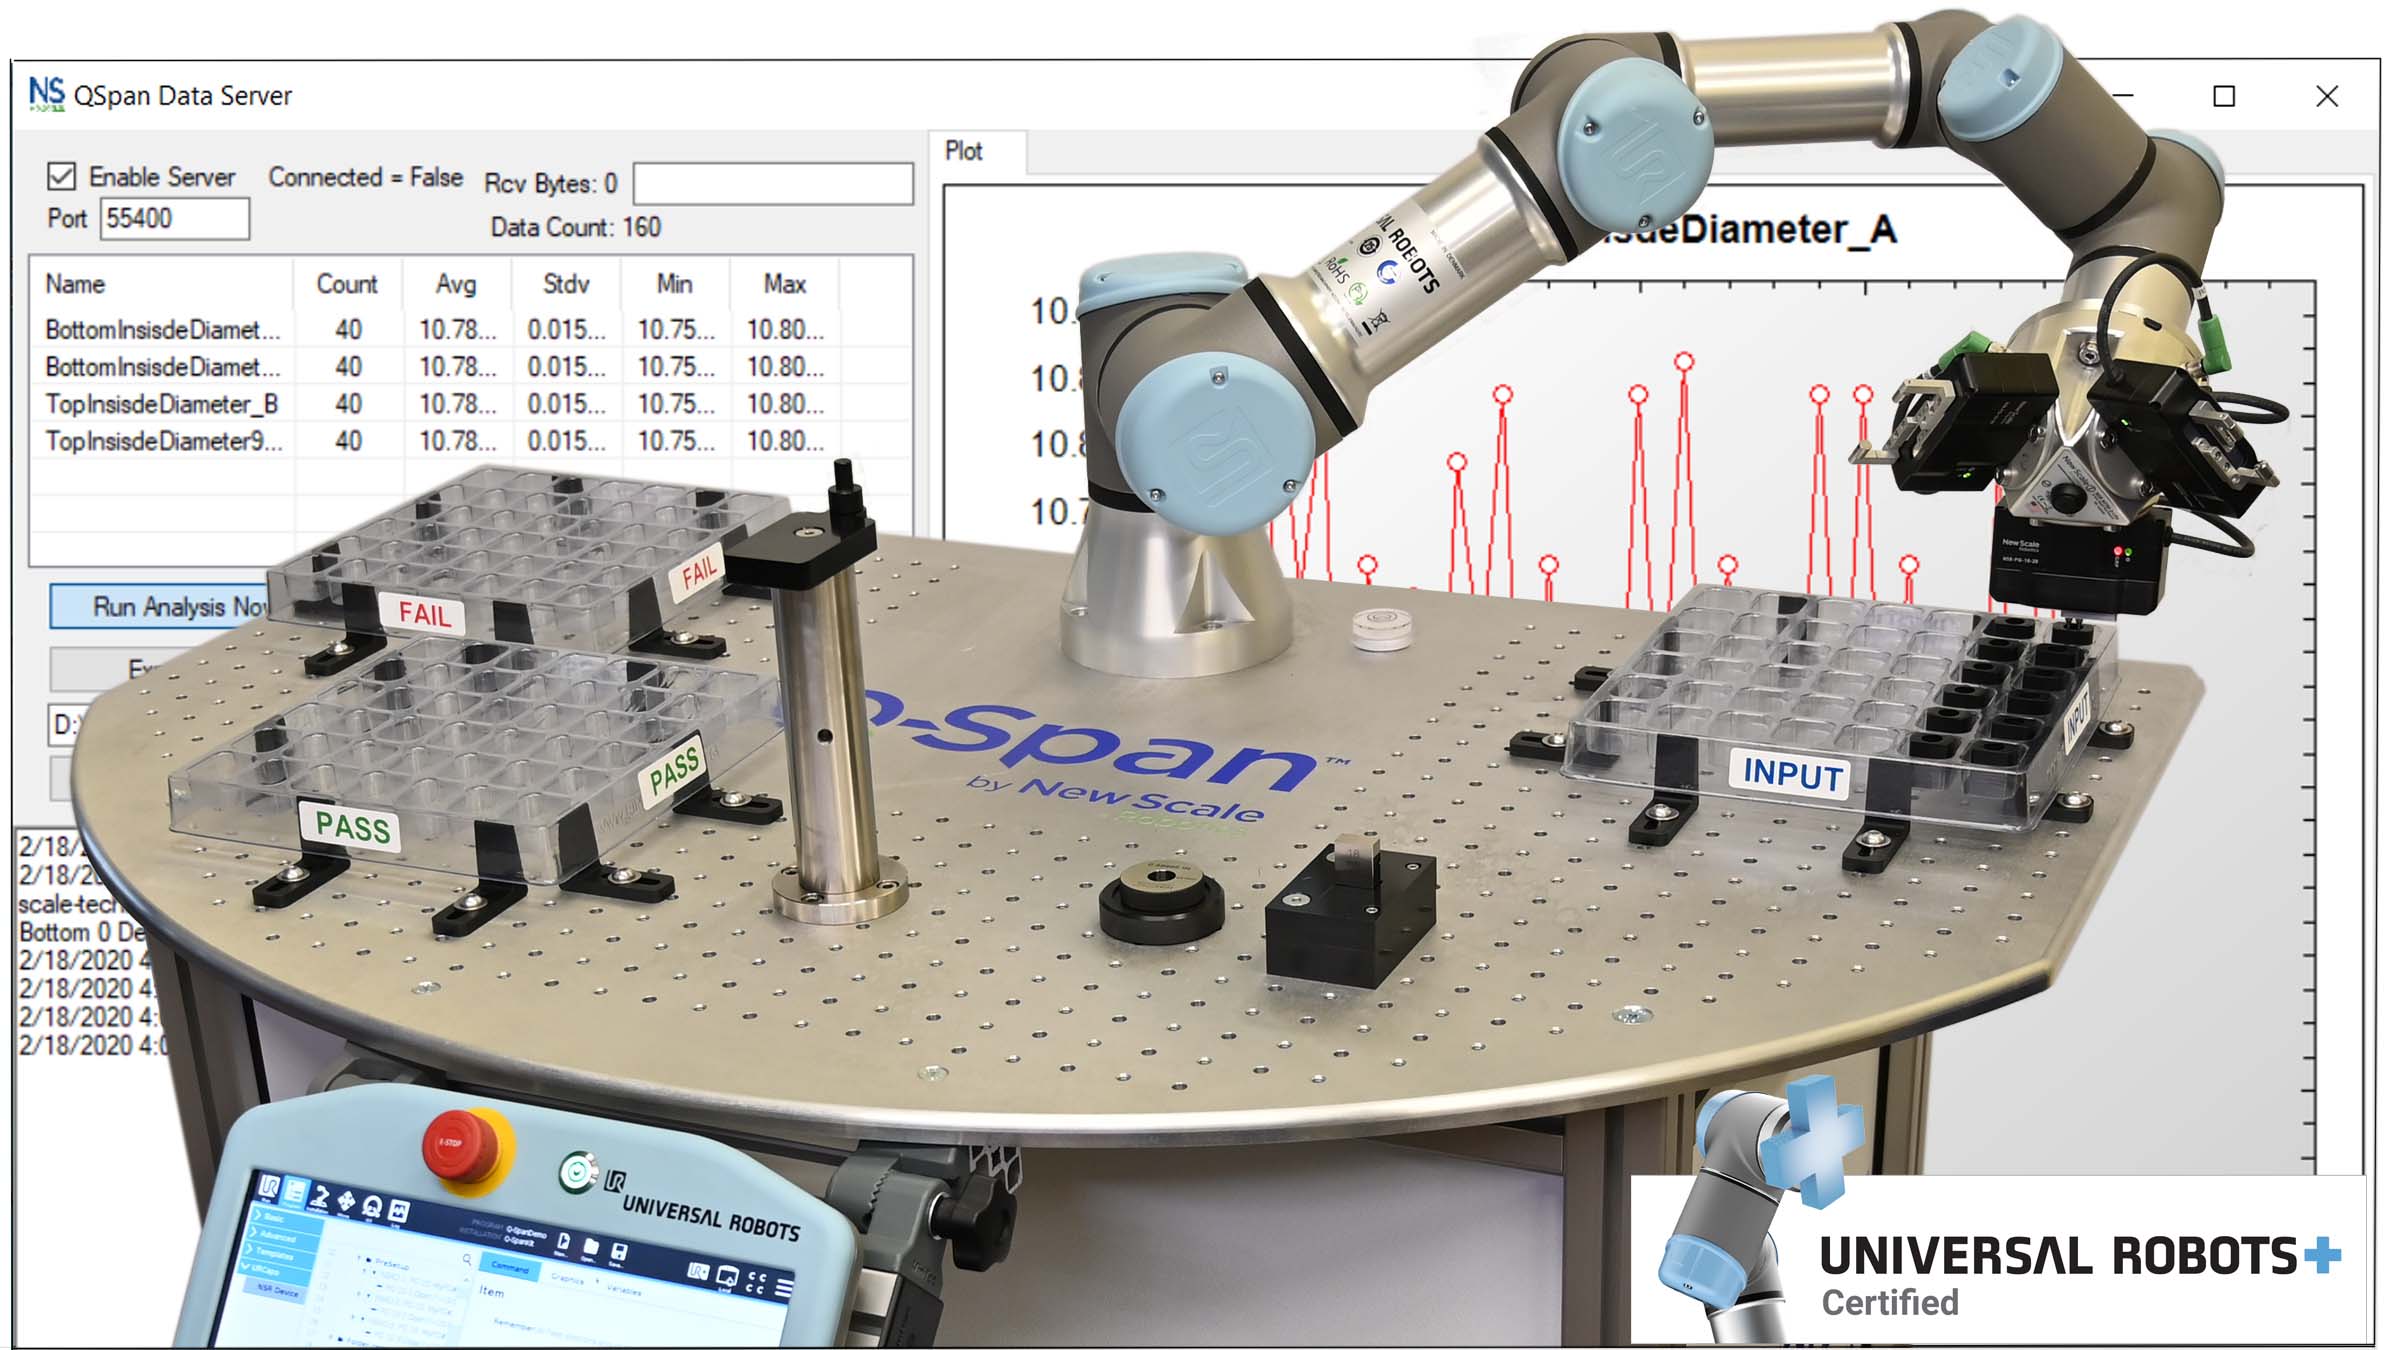 Q-Span™ Workstation Kit first Application Kit for quality inspection, certified by Universal | New Scale Robotics